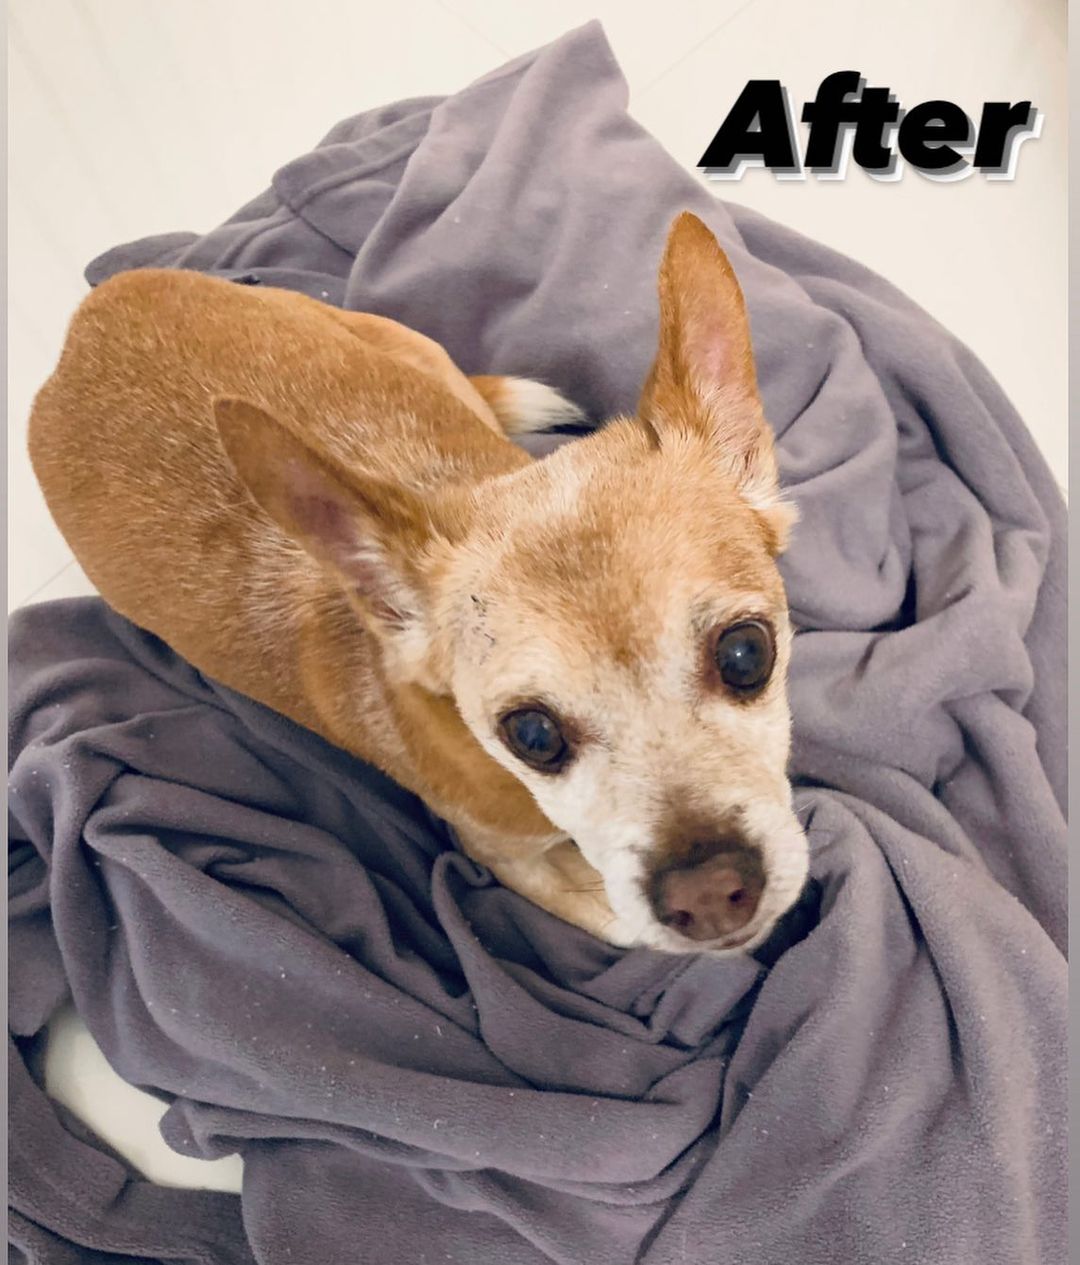 GOOD NEWS 🎉

Our seniors, Peluza and Snickers, are doing well. ❤️ They have both been eating and are in great spirits .💕

Snickers’ non-malignant tumor was removed from his forehead and the fatty growth from his chest was also removed. 🙏🏻 If you thought he was handsome before, wait til you see him now! 😍What a beautiful boy we have here! 👏

Peluza is back to her usual self, tattling on all her ResQue brothers and sisters 🐶and reporting when anyone even moves. 🤣 She is also doing her regular rounds 🐾of the kitchen and dining room, in case any human want to give her a bite 🥪🍔🥗🥙of what they’re eating (they usually do 😂). 

As always, we thank you so much 🙏🏻for helping us help these two seniors get the help they need❤️. Because of you, they are happy and healthy 💕 

<a target='_blank' href='https://www.instagram.com/explore/tags/thankyou/'>#thankyou</a> <a target='_blank' href='https://www.instagram.com/explore/tags/rescuedogs/'>#rescuedogs</a> <a target='_blank' href='https://www.instagram.com/explore/tags/seniordogs/'>#seniordogs</a> <a target='_blank' href='https://www.instagram.com/explore/tags/happyandhealthy/'>#happyandhealthy</a> <a target='_blank' href='https://www.instagram.com/explore/tags/doglove/'>#doglove</a> <a target='_blank' href='https://www.instagram.com/explore/tags/lovemydog/'>#lovemydog</a> <a target='_blank' href='https://www.instagram.com/explore/tags/whorescuedwho/'>#whorescuedwho</a> <a target='_blank' href='https://www.instagram.com/explore/tags/rescuedogsofinstagram/'>#rescuedogsofinstagram</a>